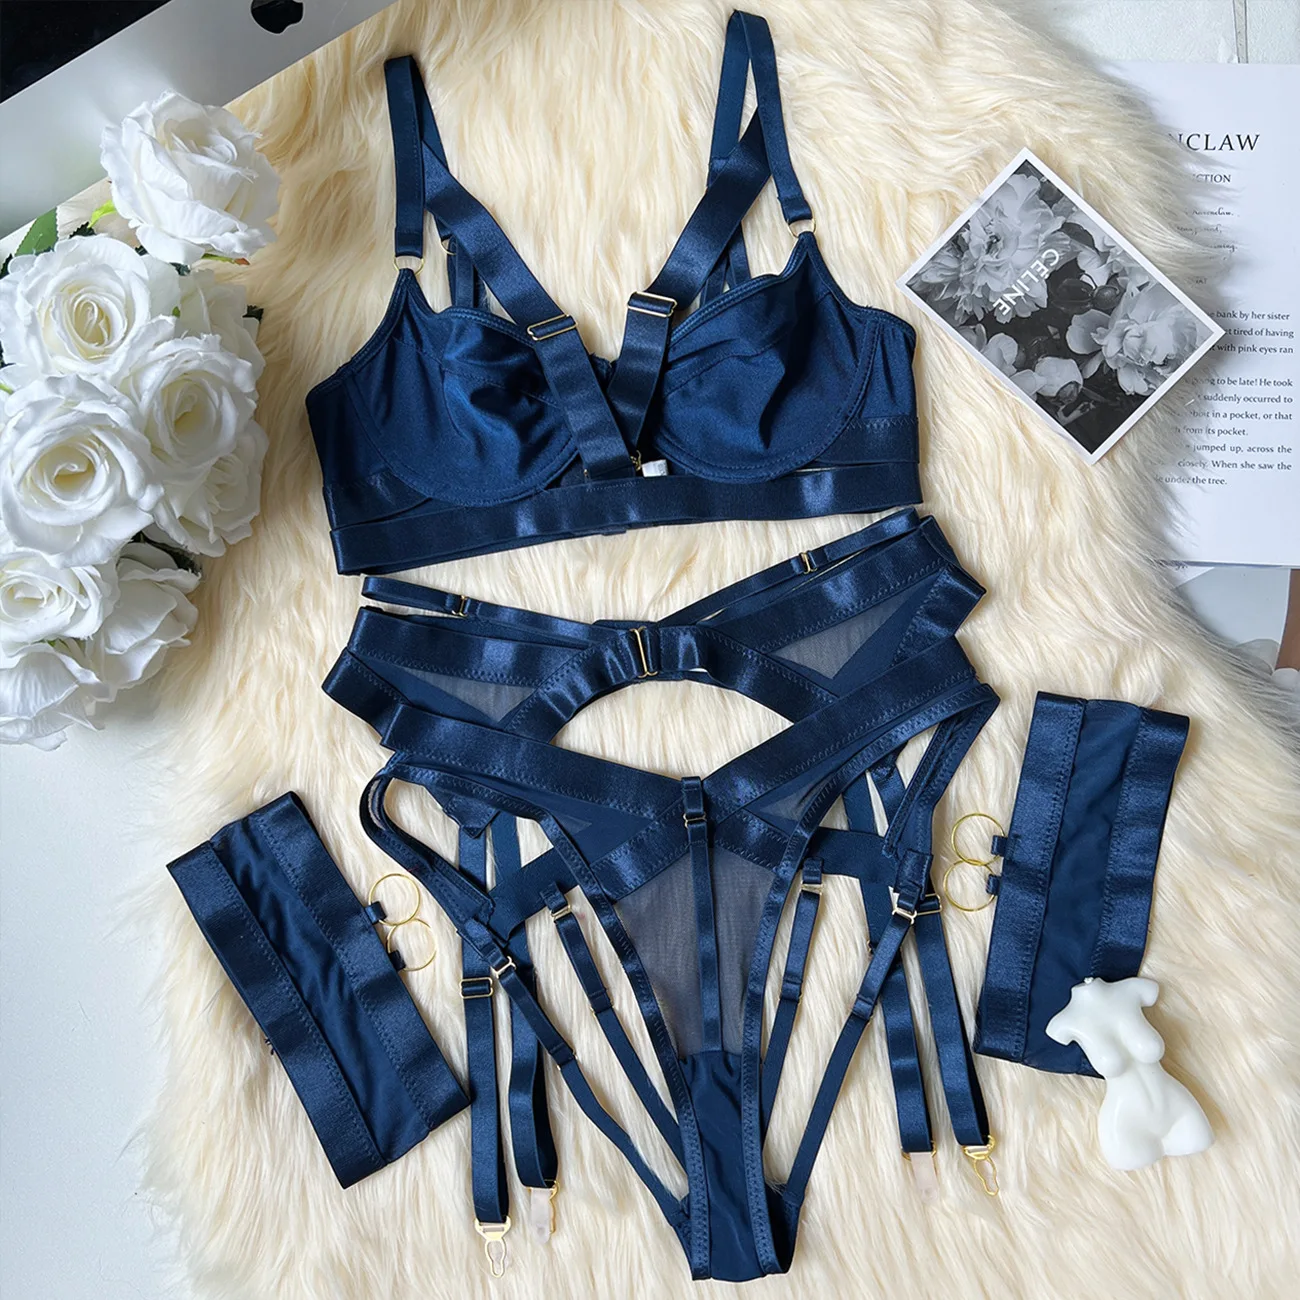 Ellolace Sexy Lingerie For Fine Women Navy Blue Sex Suit See Through Crotchless Panties Erotic Intimate Hot Push Up Underwear